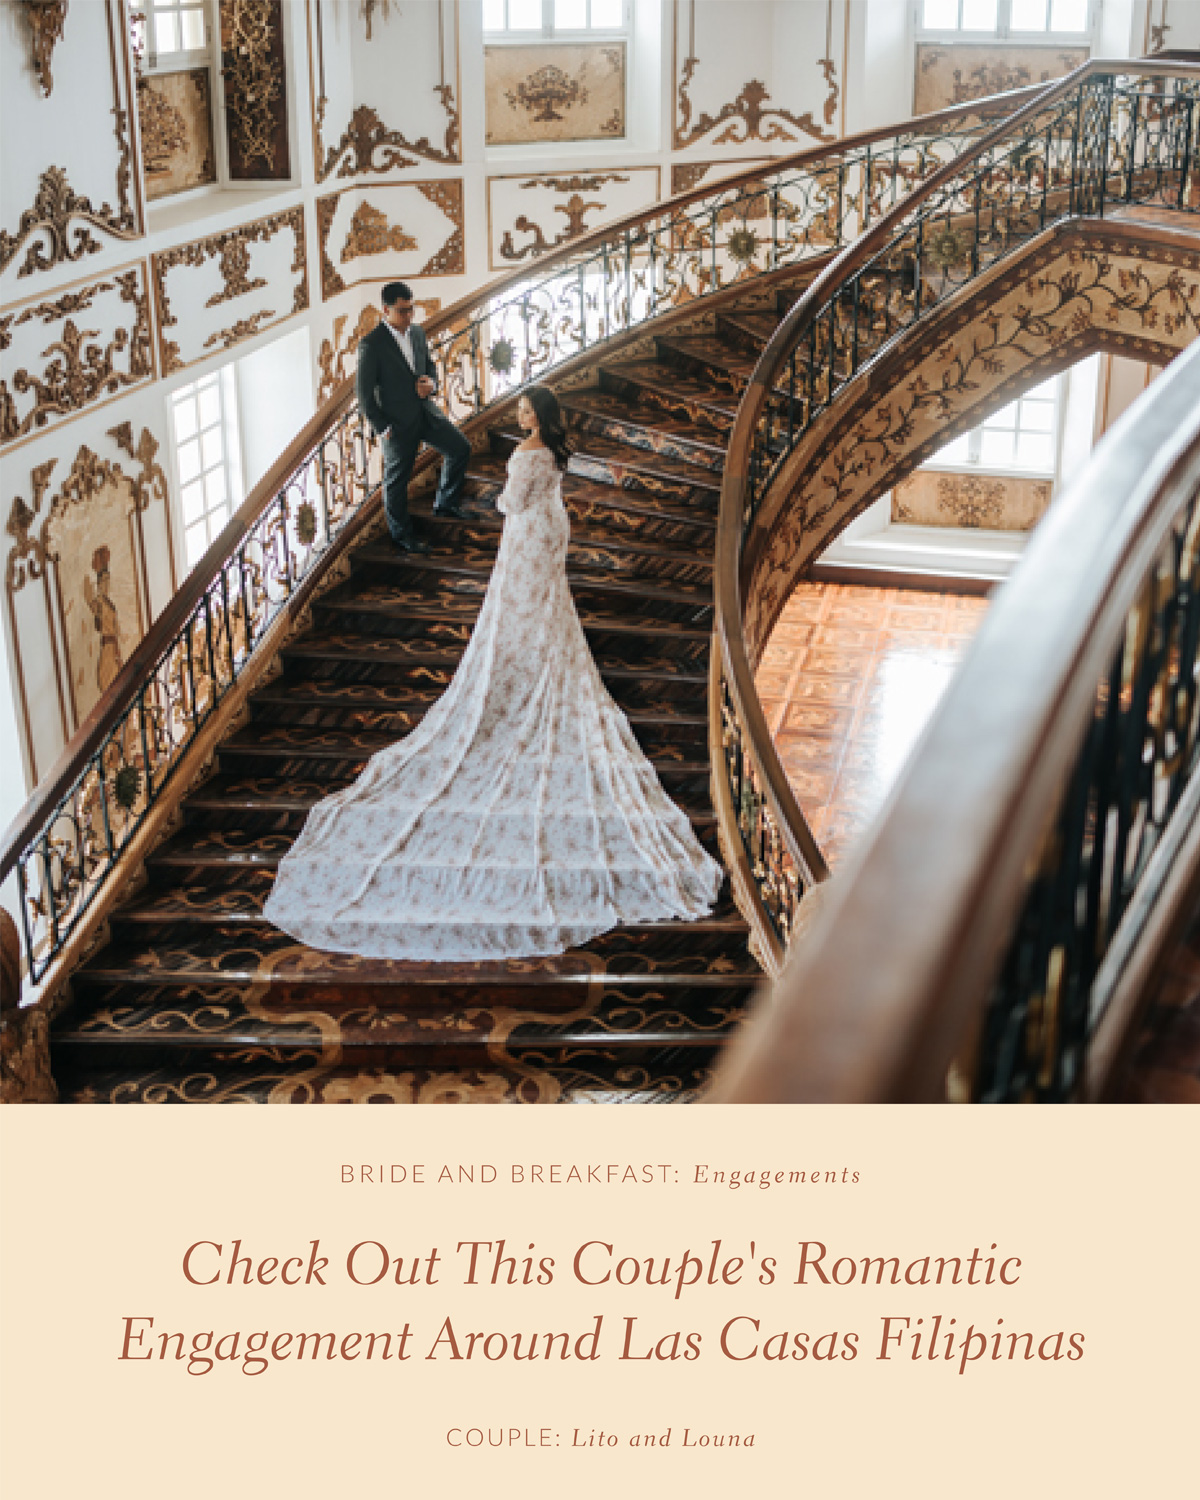 Check Out This Couple's Romantic Engagement Around Las Casas Filipinas